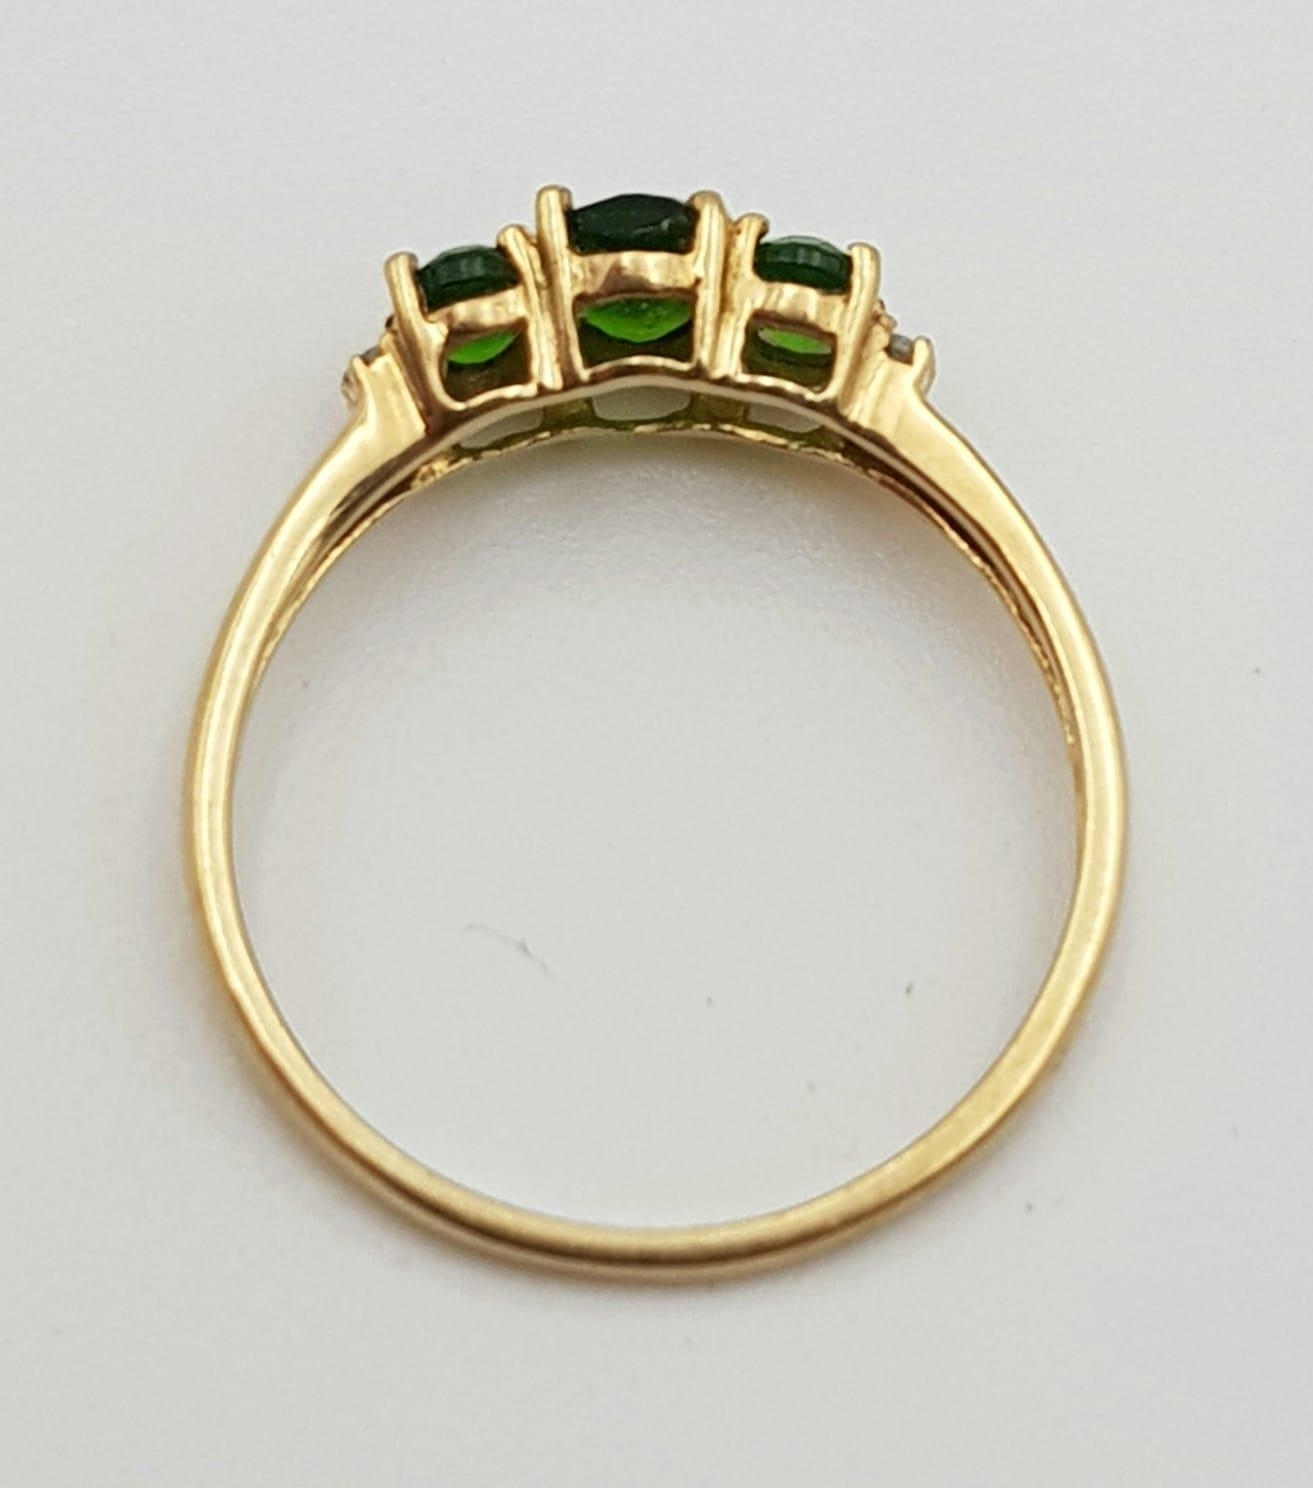 A 9K GOLD RING WITH GREEN TITANITE TRILOGY FLANKED BY 2 SMALL DIAMONDS ON EACH SIDE. 1.45gms size P - Image 3 of 6